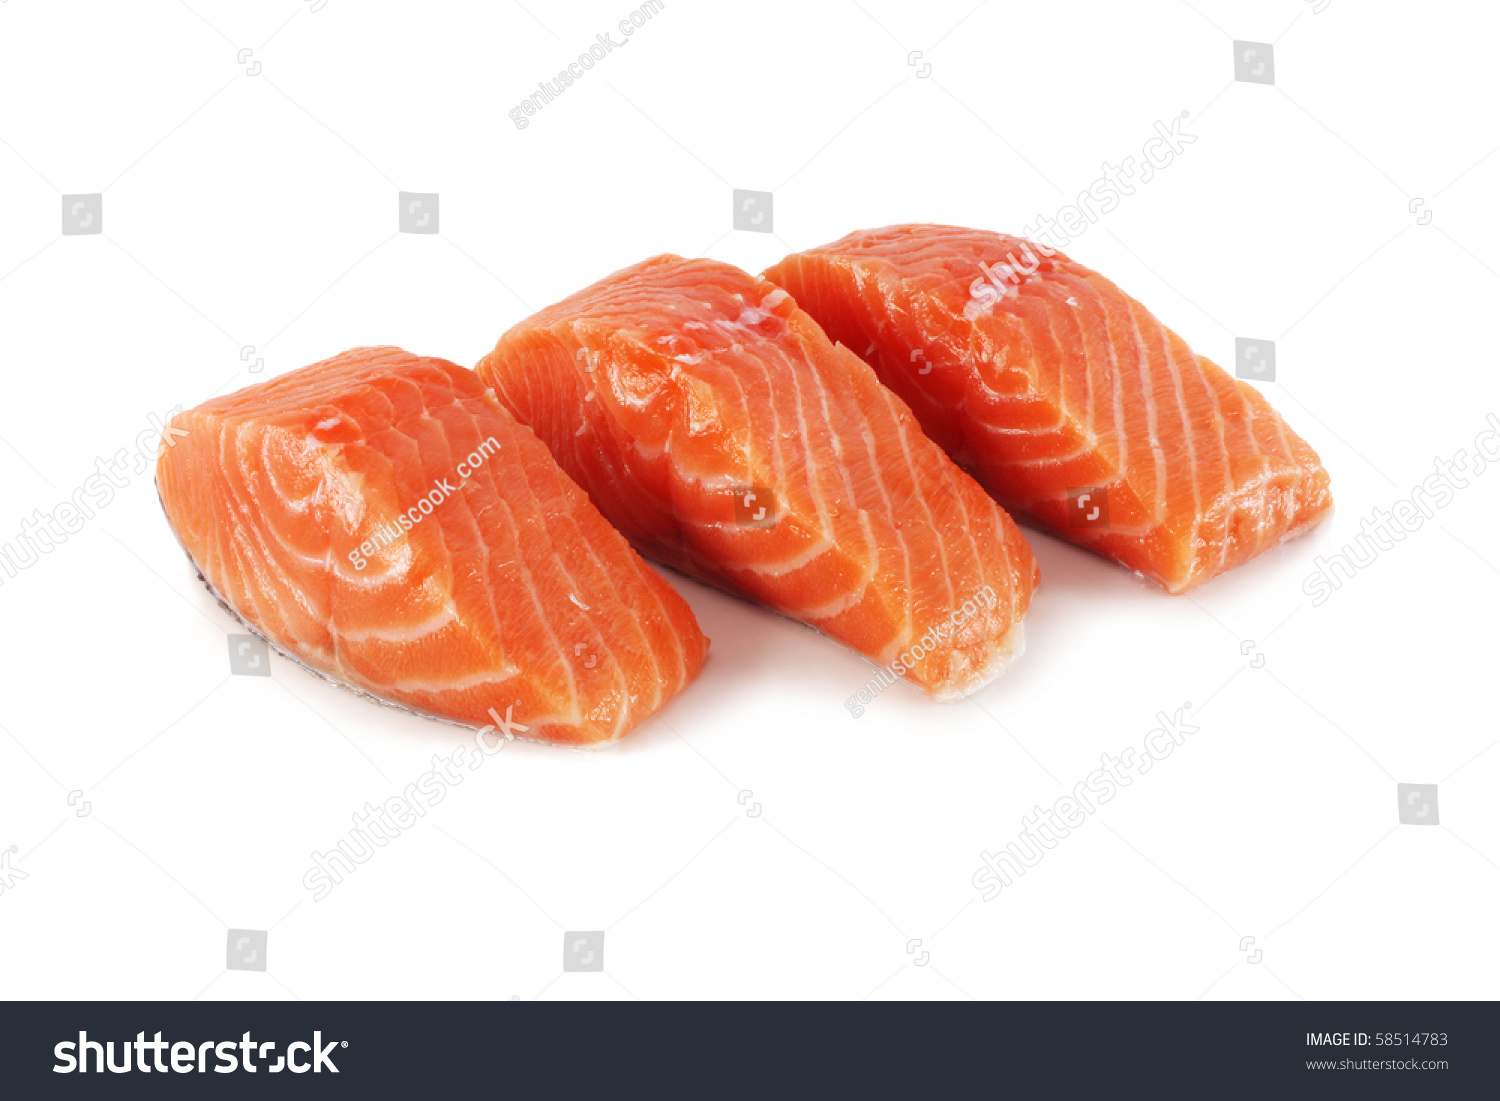 Slices Of Salmon On A White Background Stock Photo 58514783 : Shutterstock